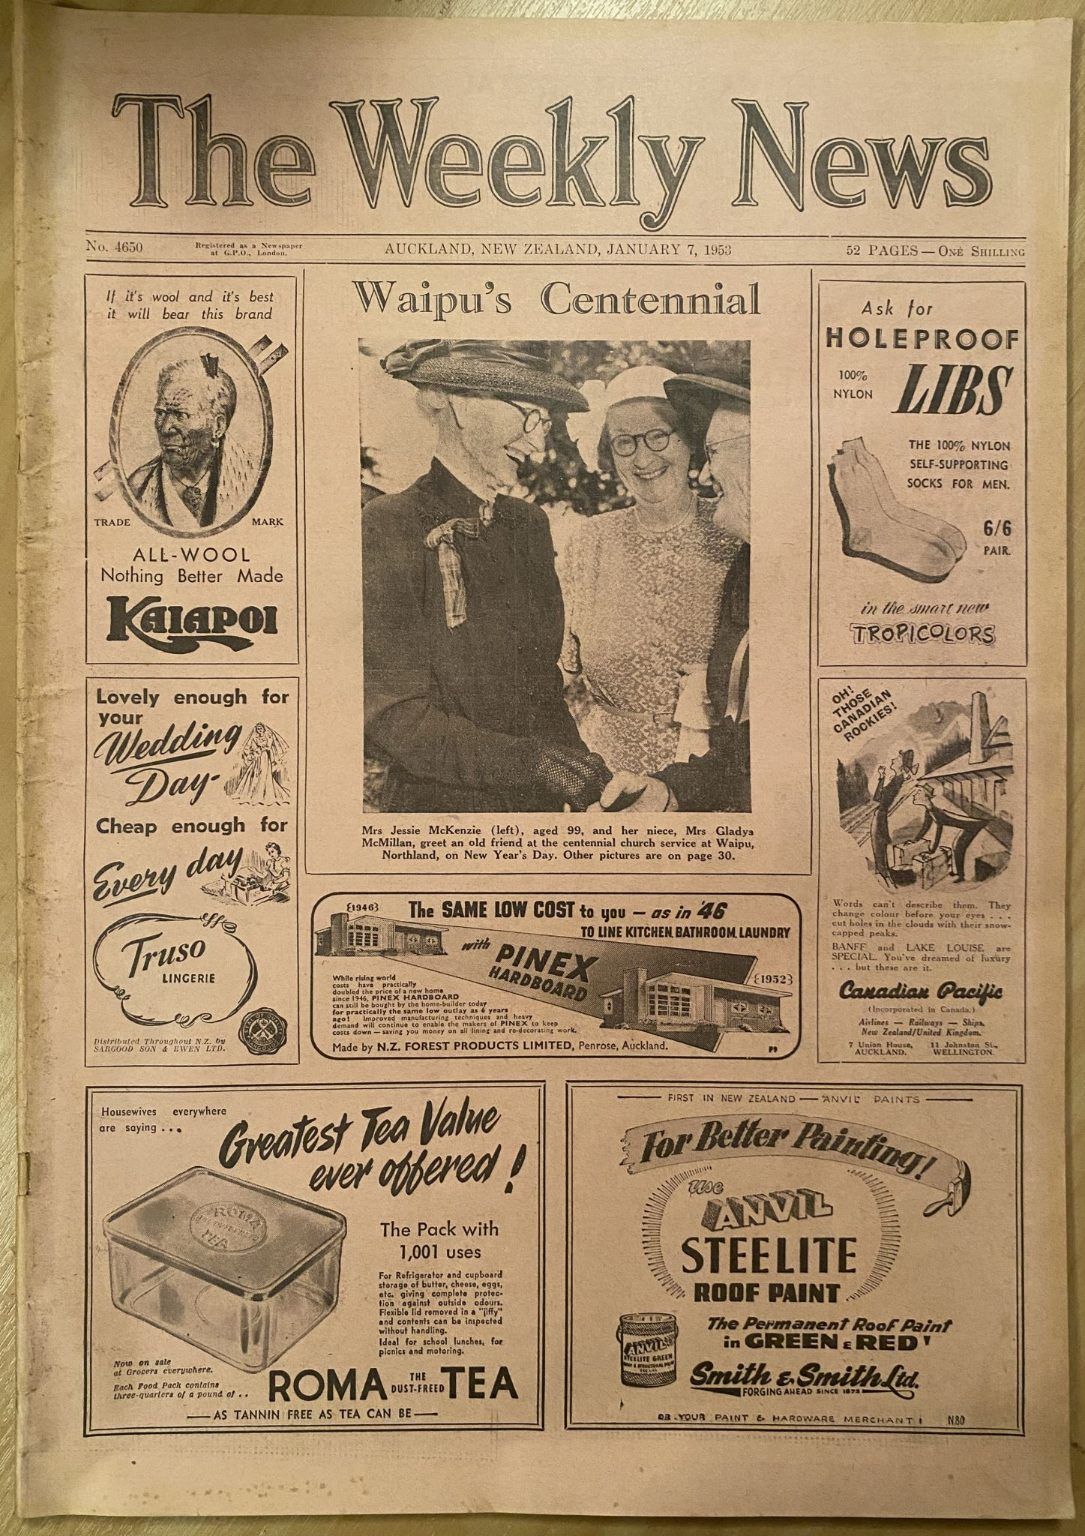 OLD NEWSPAPER: The Weekly News - No. 4650, 7 January 1953